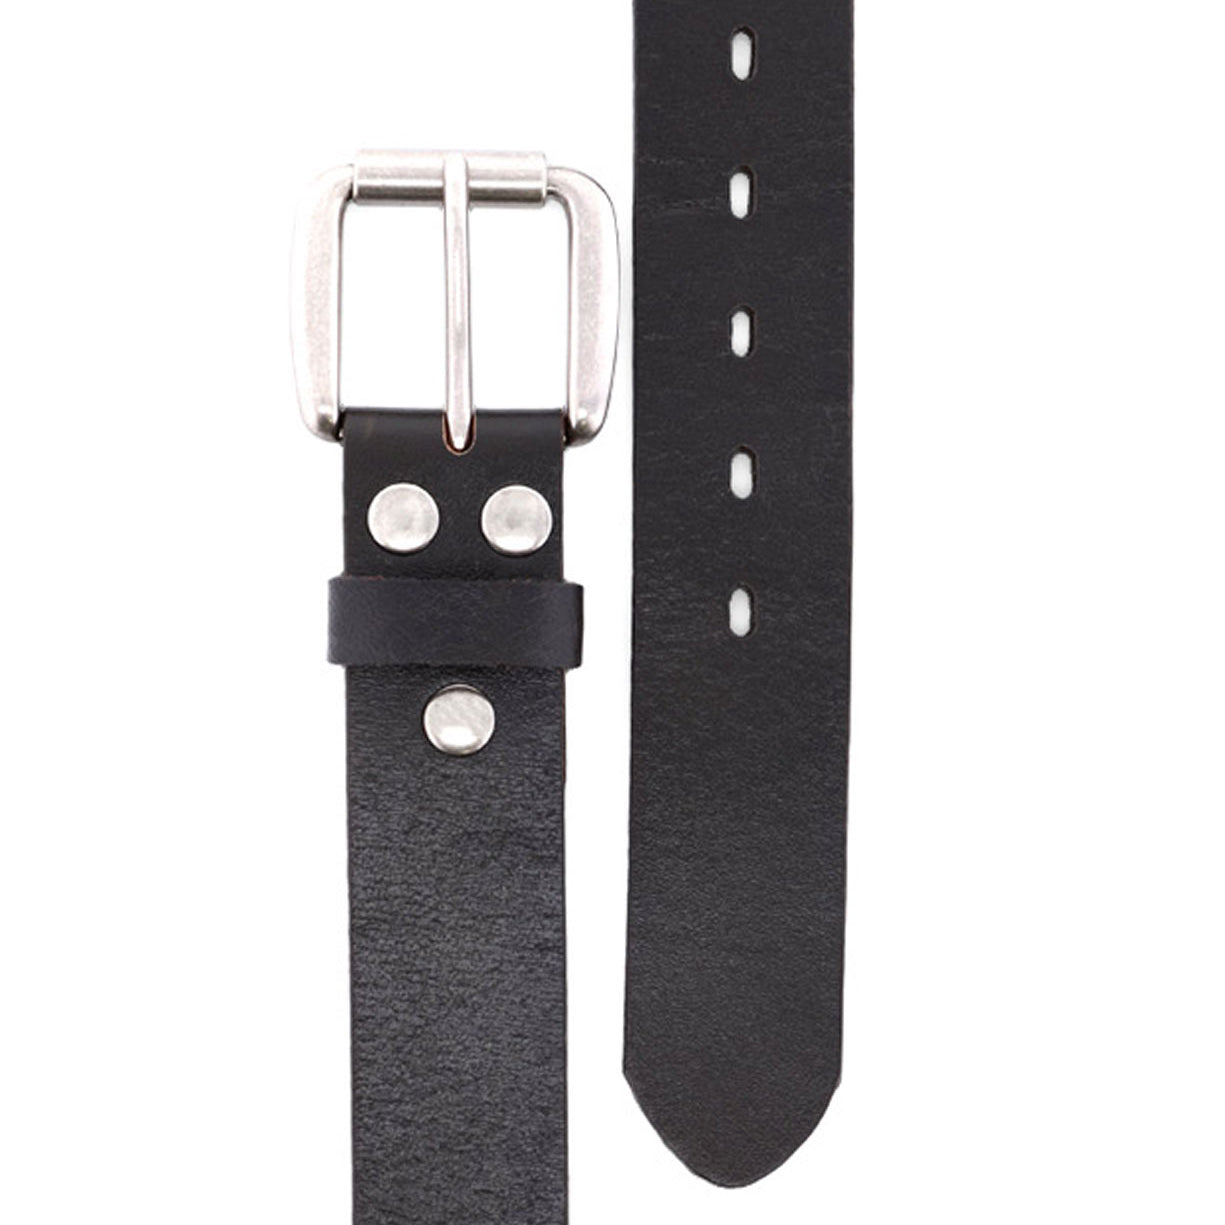 A Drifter belt by Bed Stu on a white background.